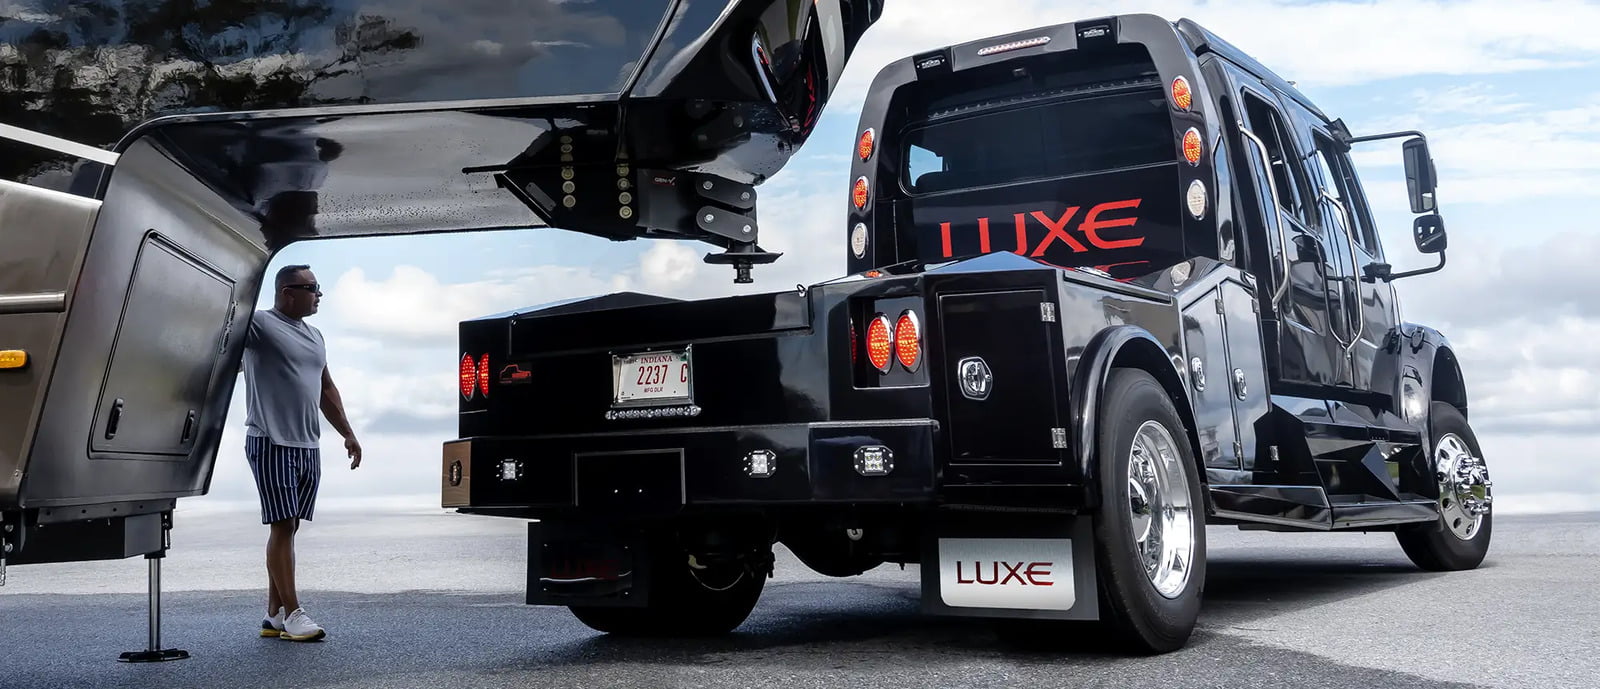 A Freightliner M2 106, designed as a fifth wheel RV hauler truck, is towing a luxury fifth wheel made by their partner company Luxe Fifth Wheel.